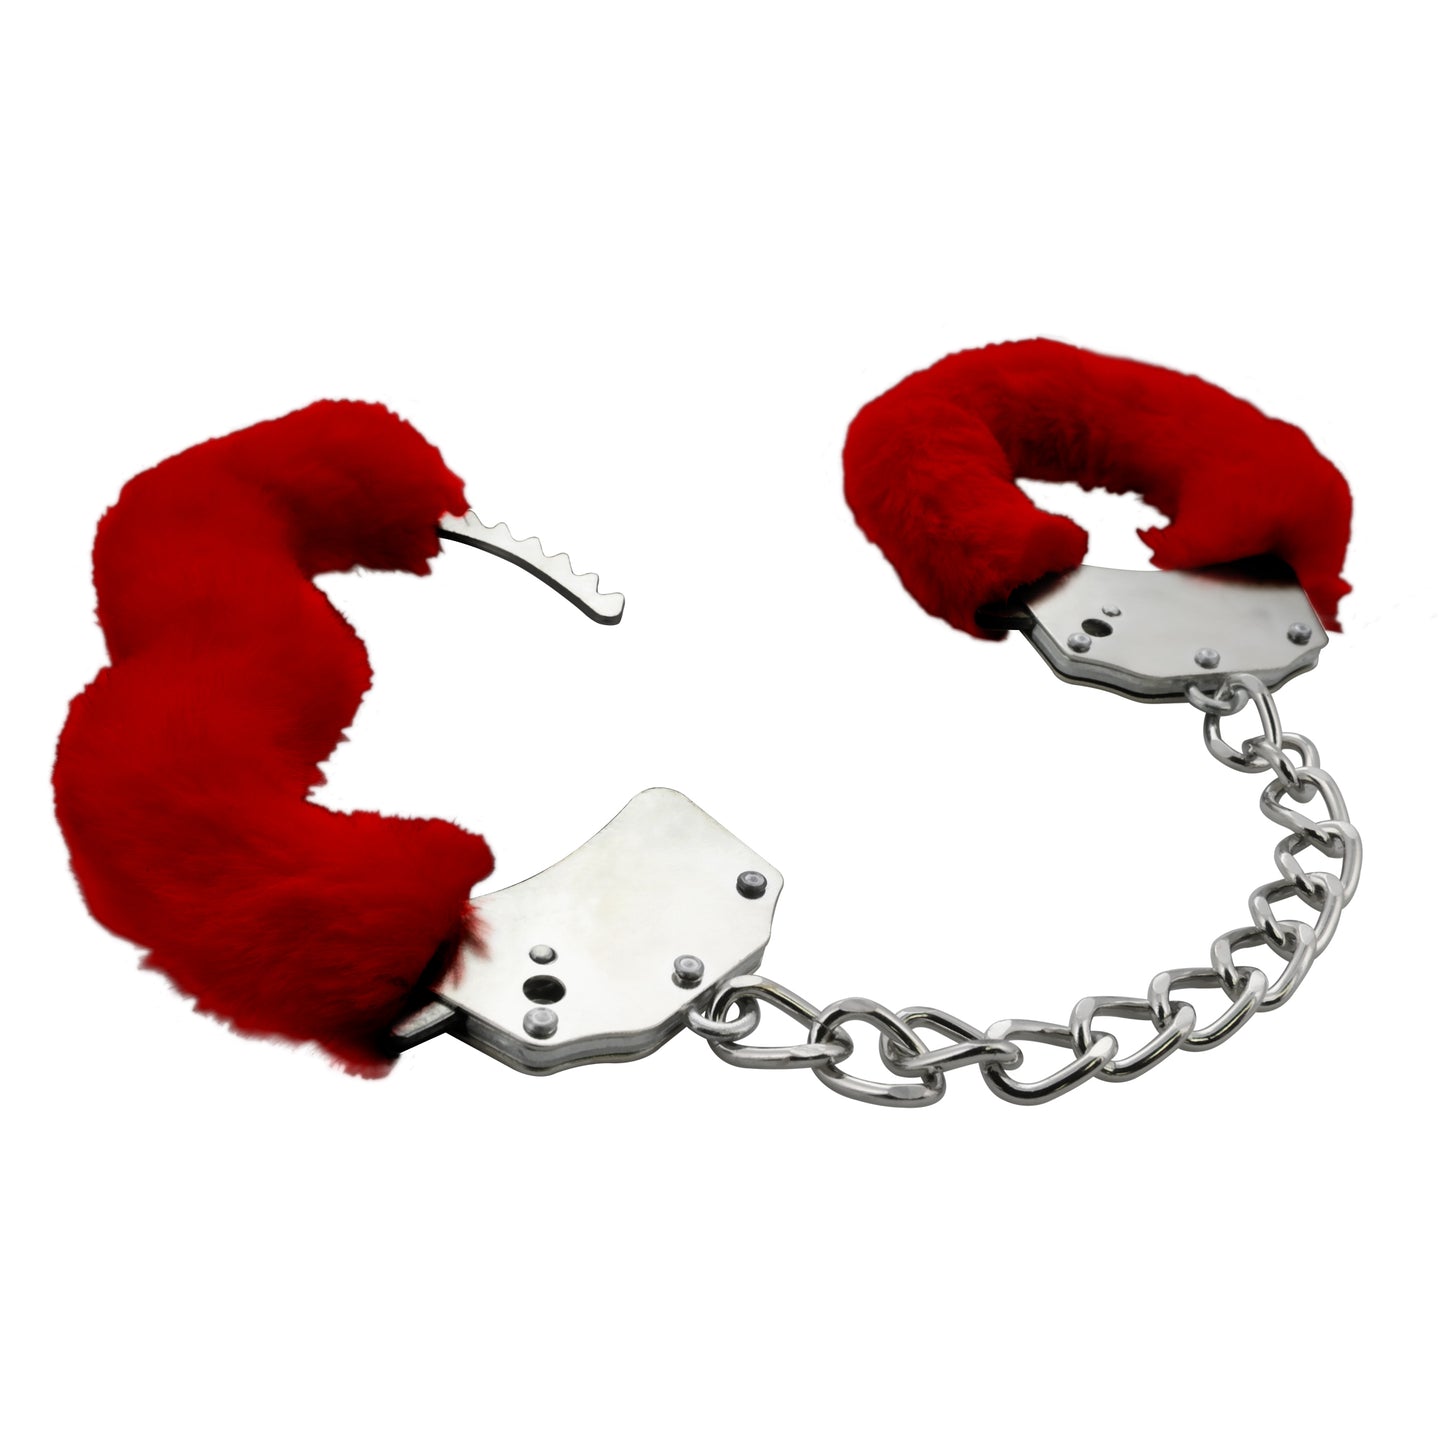 Soft and Furry Bondage Handcuffs - Consent and Comply Cuffs